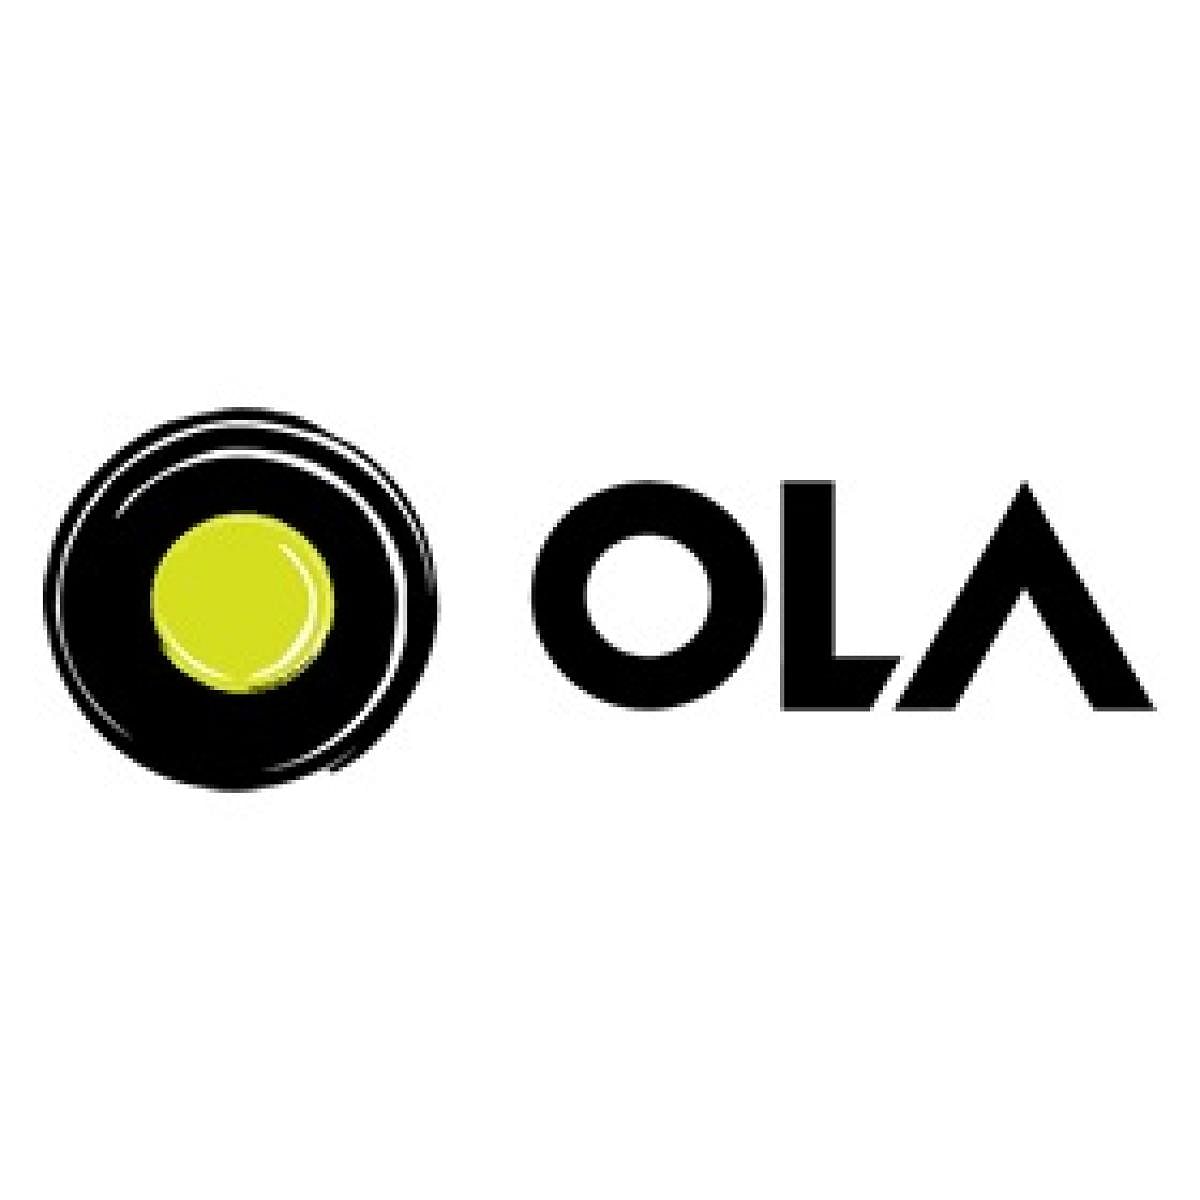 According to the sources, Ola Fleet Technologies will get about USD 500 million through a mix of equity and debt to offer self-drive services in the country.